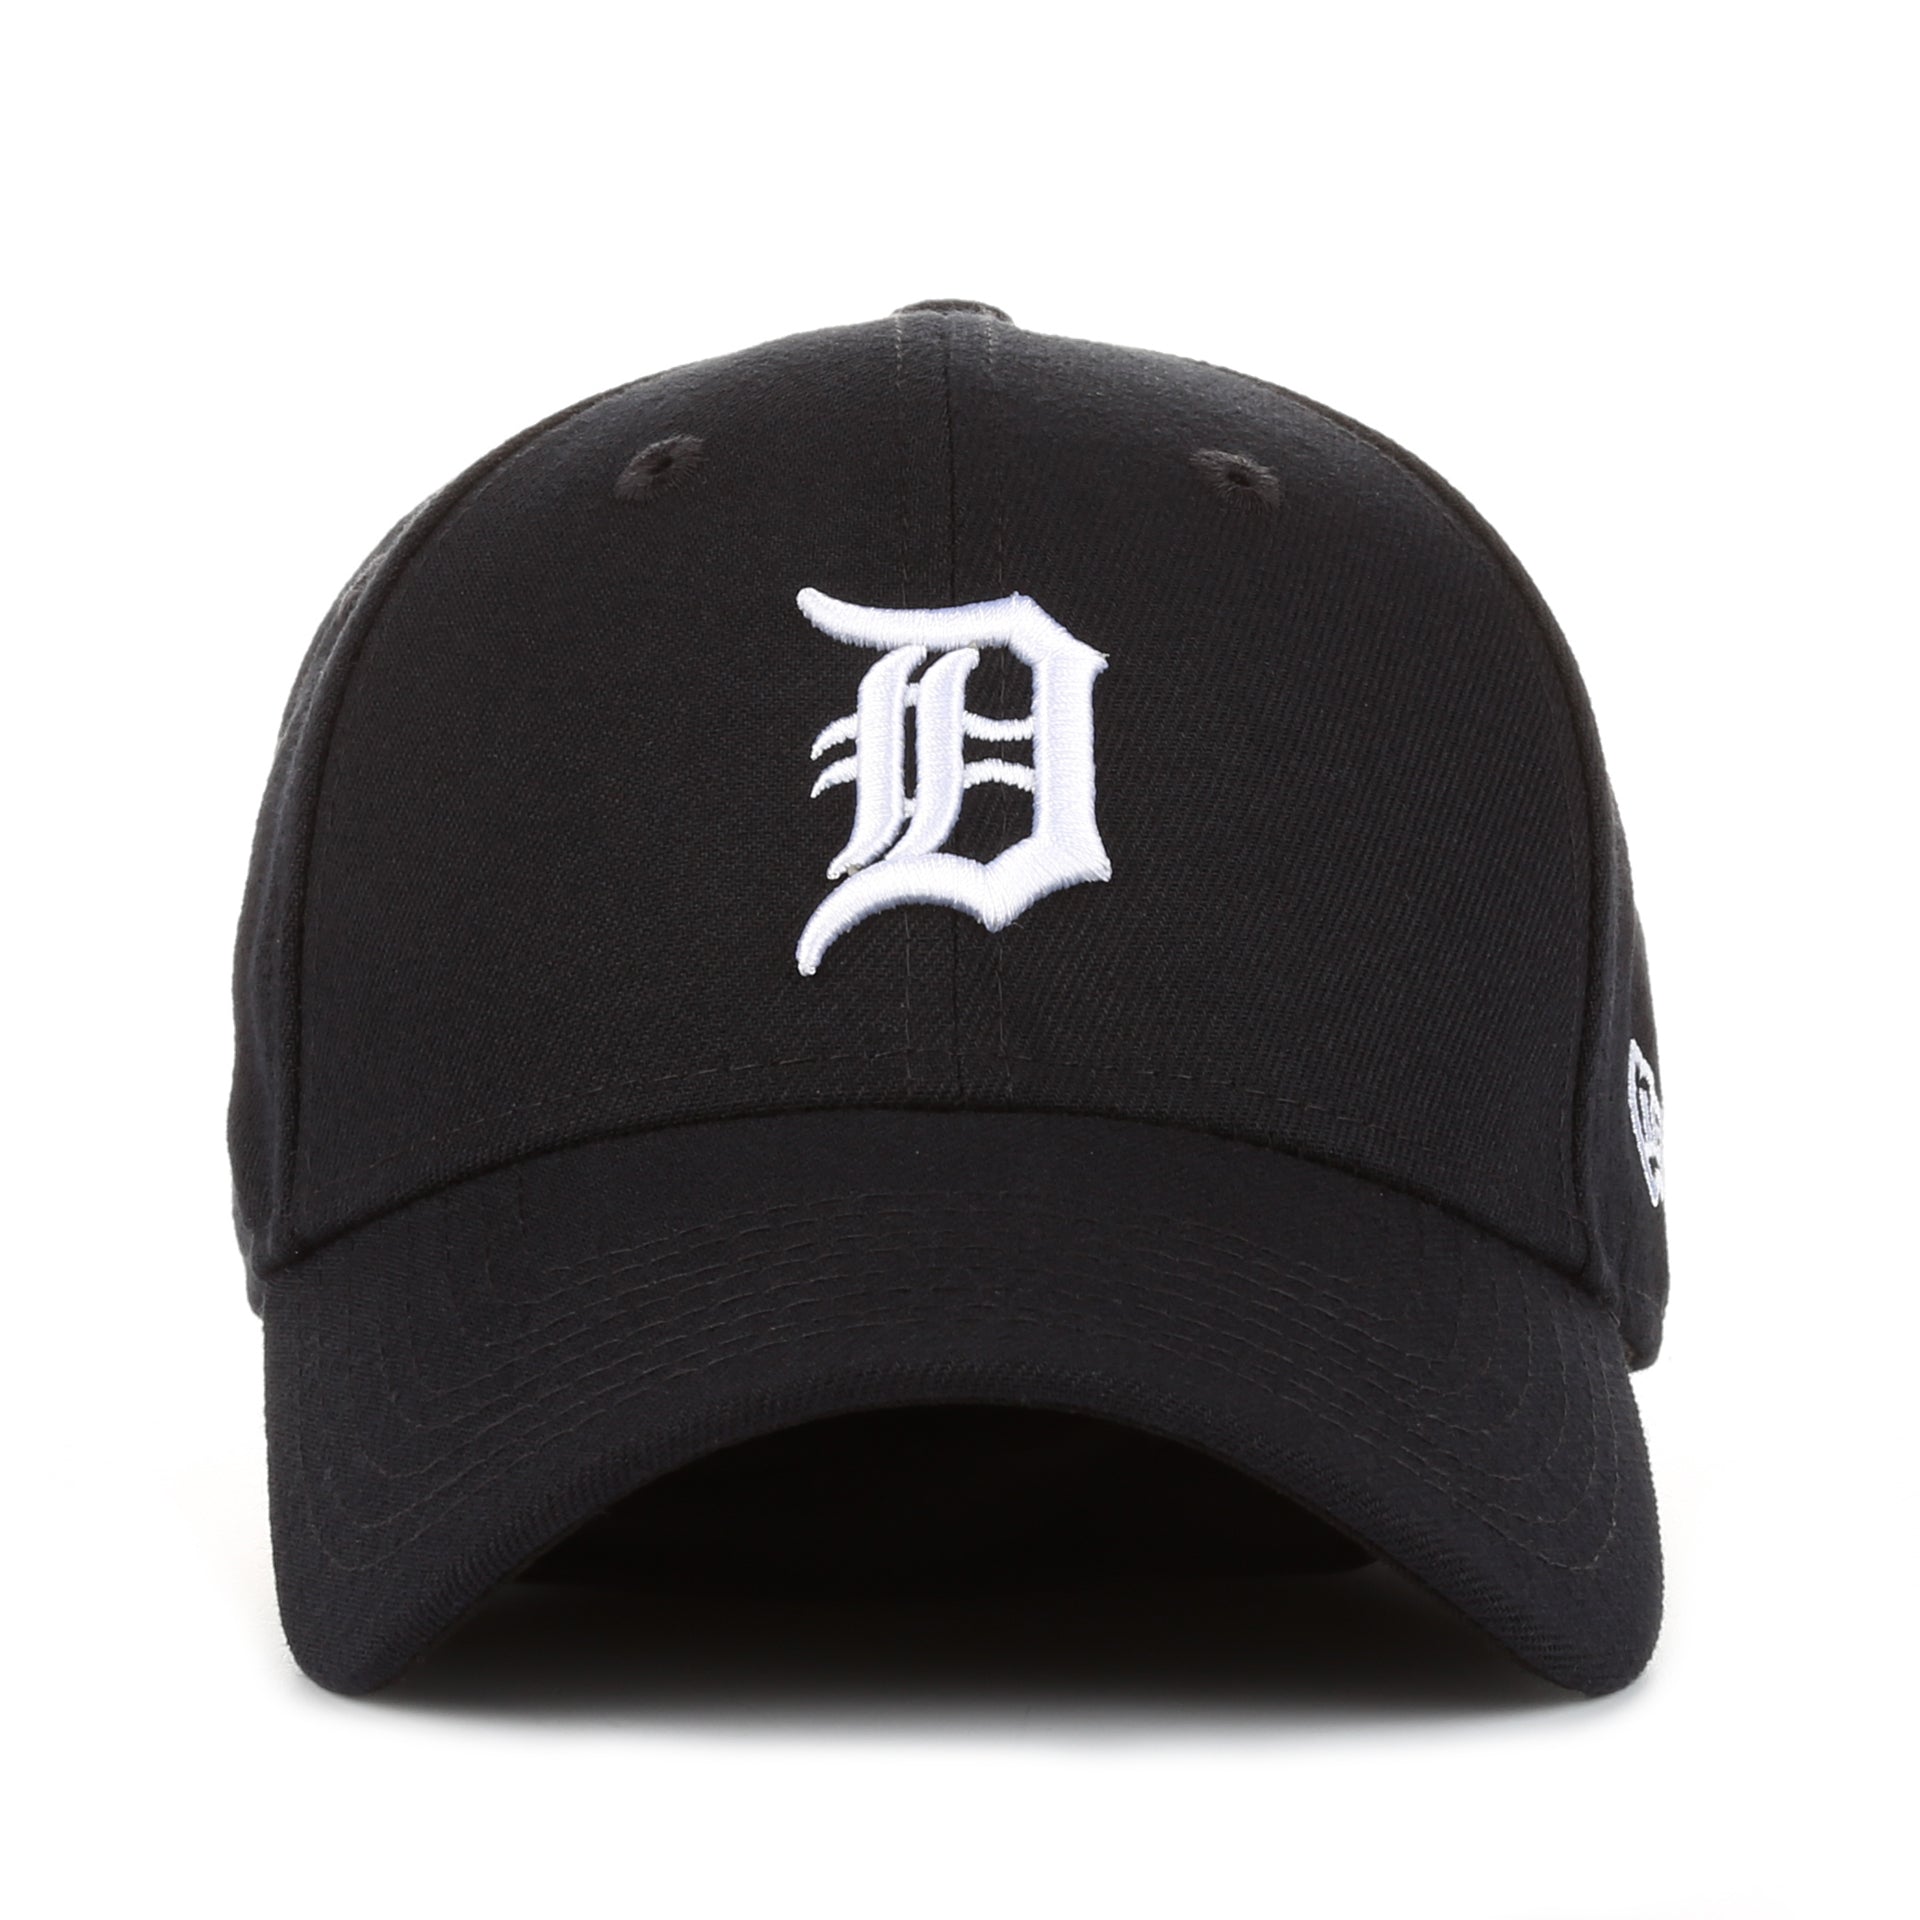 New Era 9Forty The League Game Cap - Detroit Tigers/Black - New Star